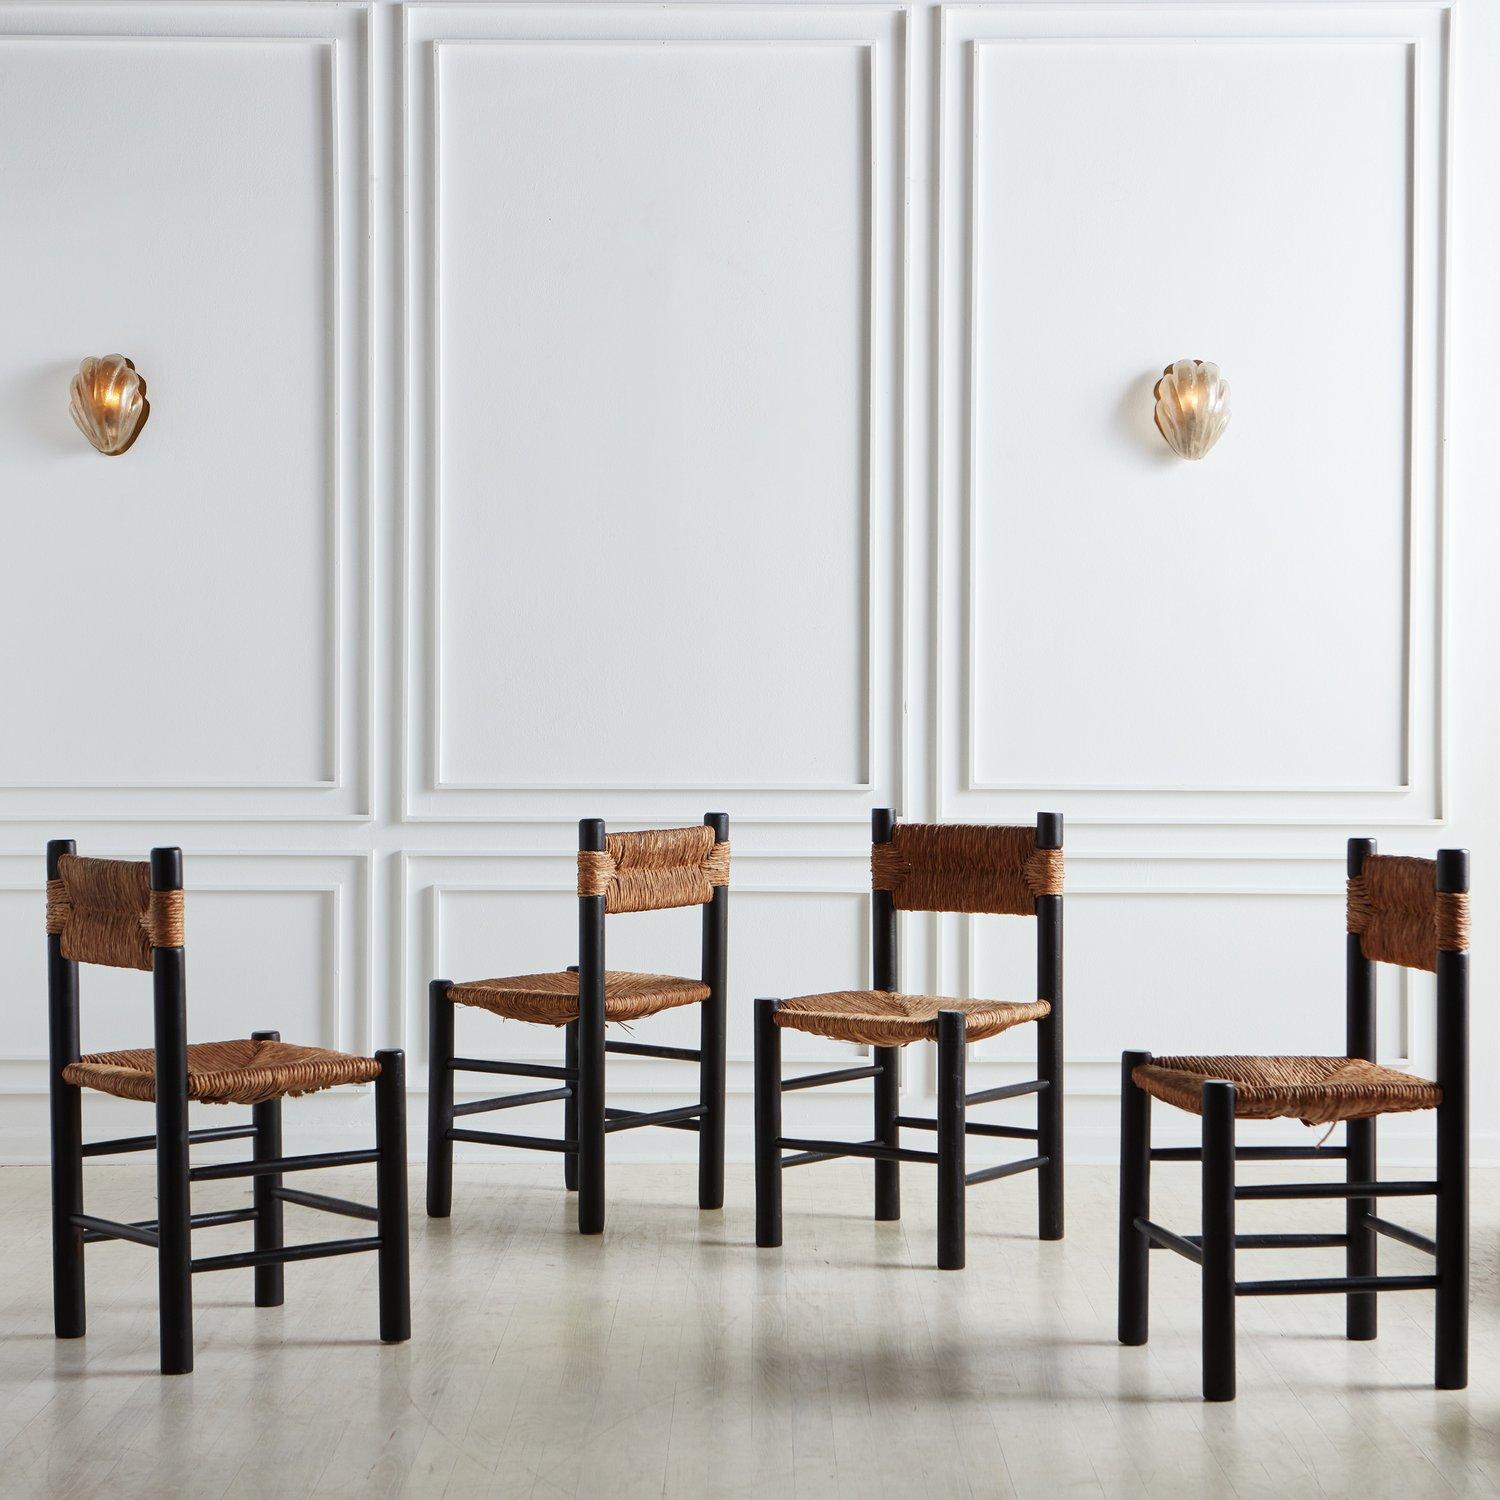 A set of 10 thoughtfully crafted black painted wood & rush dining chairs, reminiscent of Charlotte Perriand and her infamous Dordogne chair for Robert Sentou. Sourced in France, 1950s.

